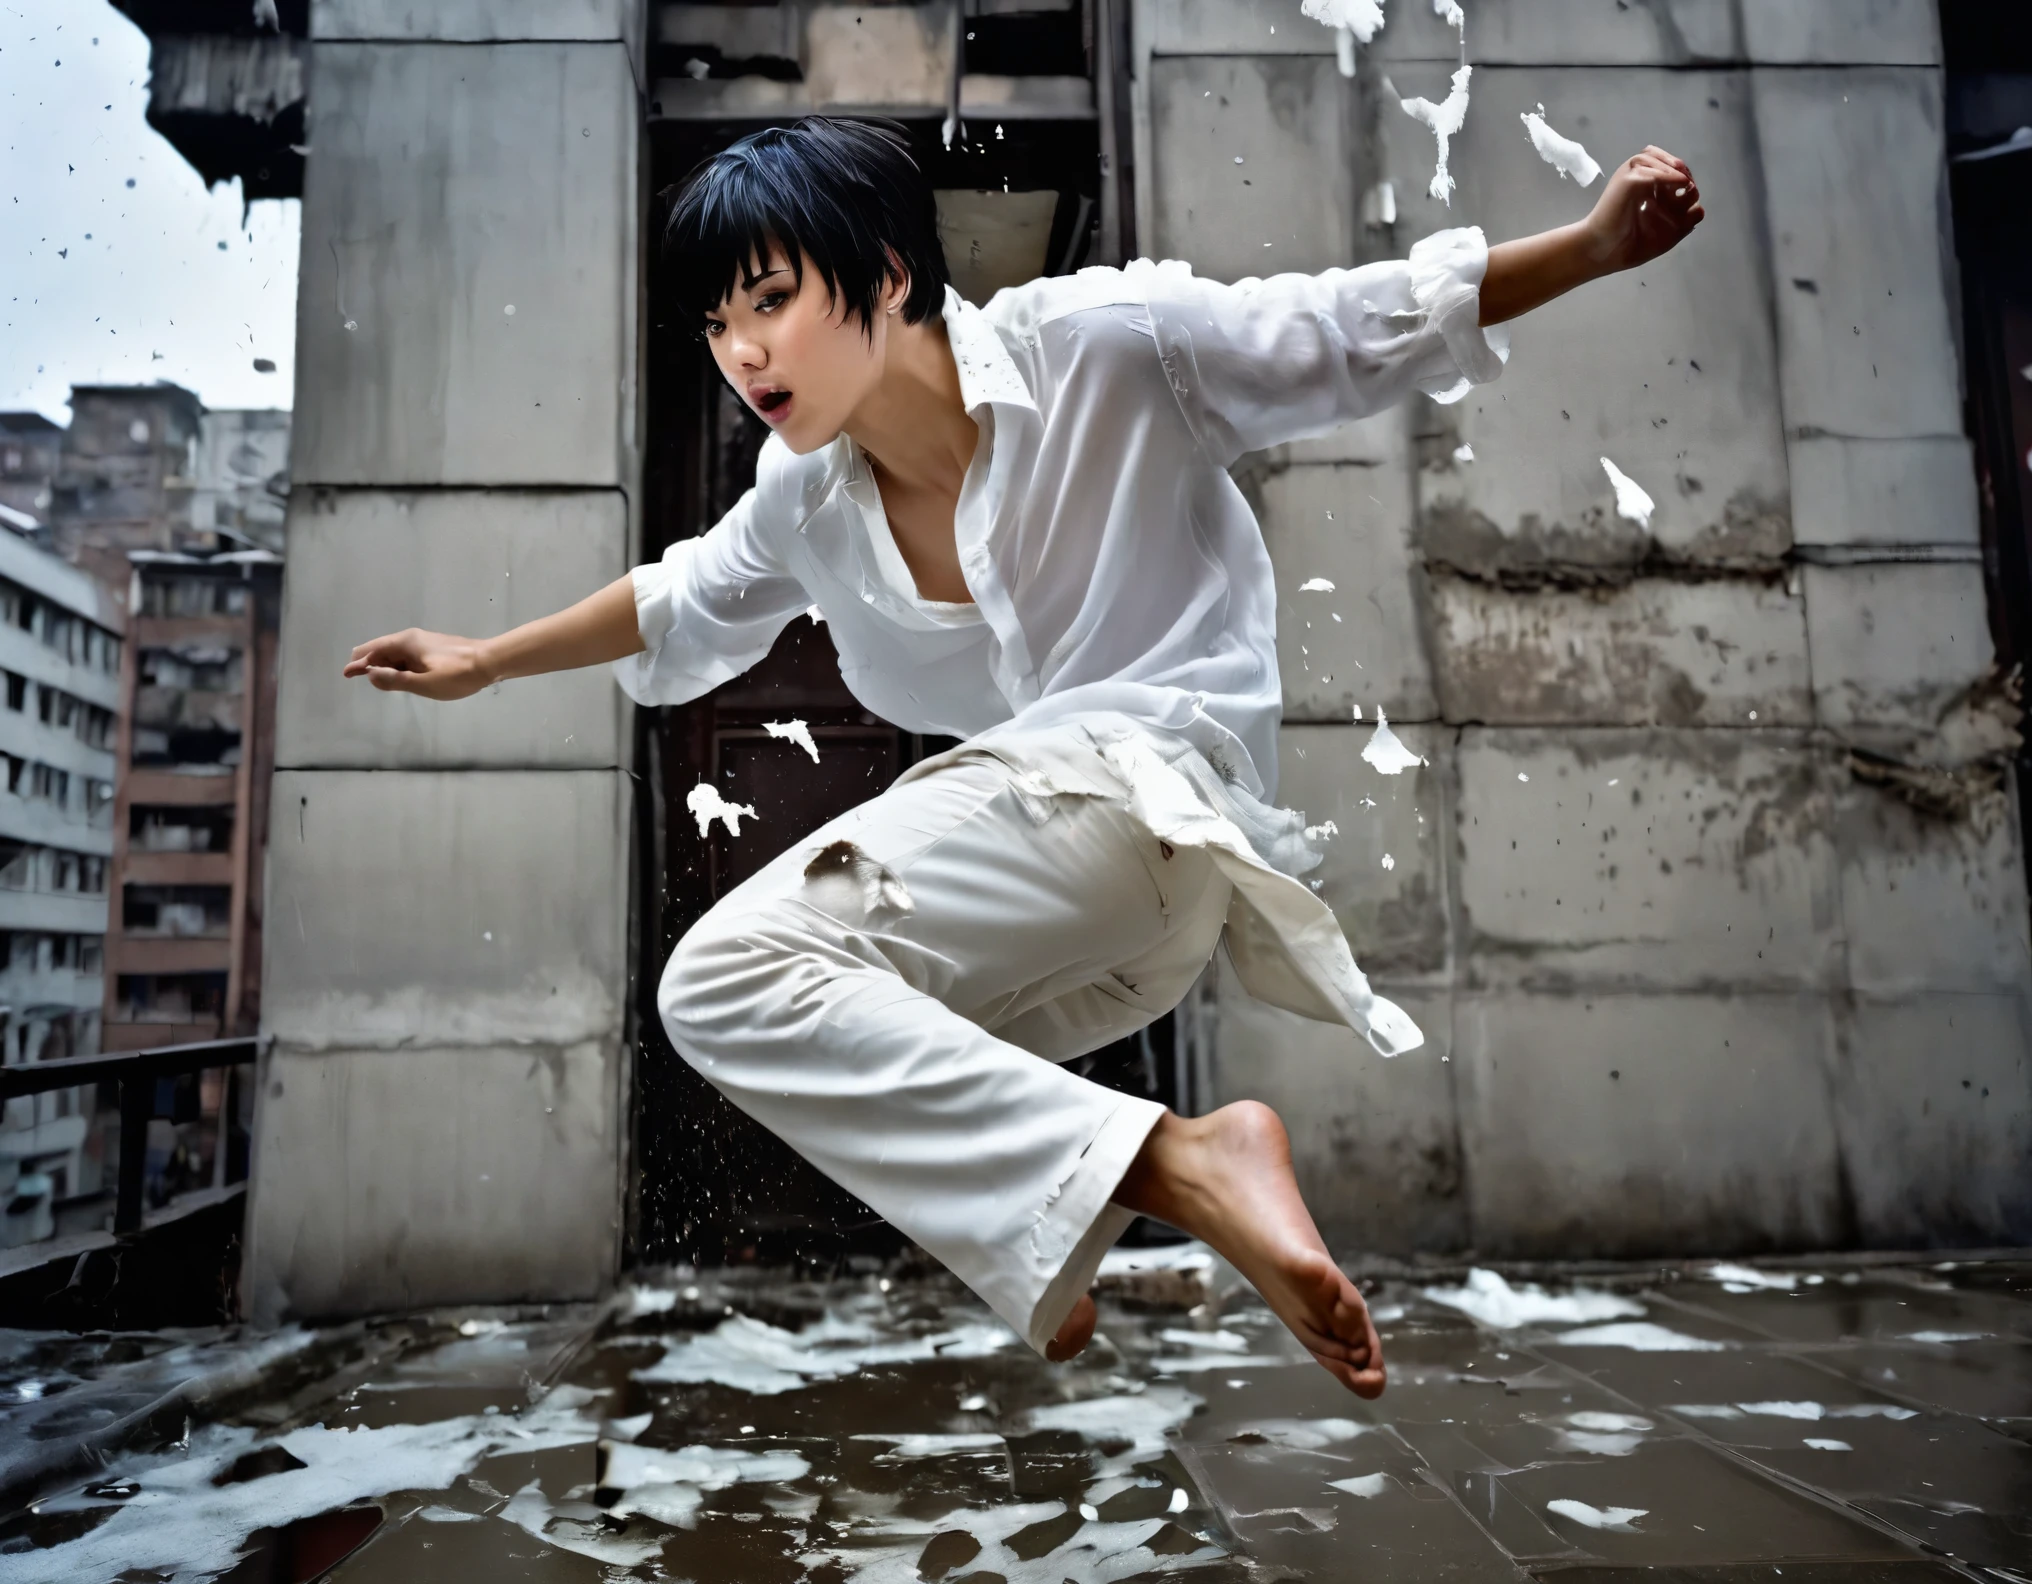 the young man with short black hair with bangs falling to the ground of a building, humid weather, cold weather, dark image, (((WHITE CLOTHES ONLY))), wearing a torn white blouse and pants, falling from the sky to the ground, movement of falling from the sky, (((barefoot)))